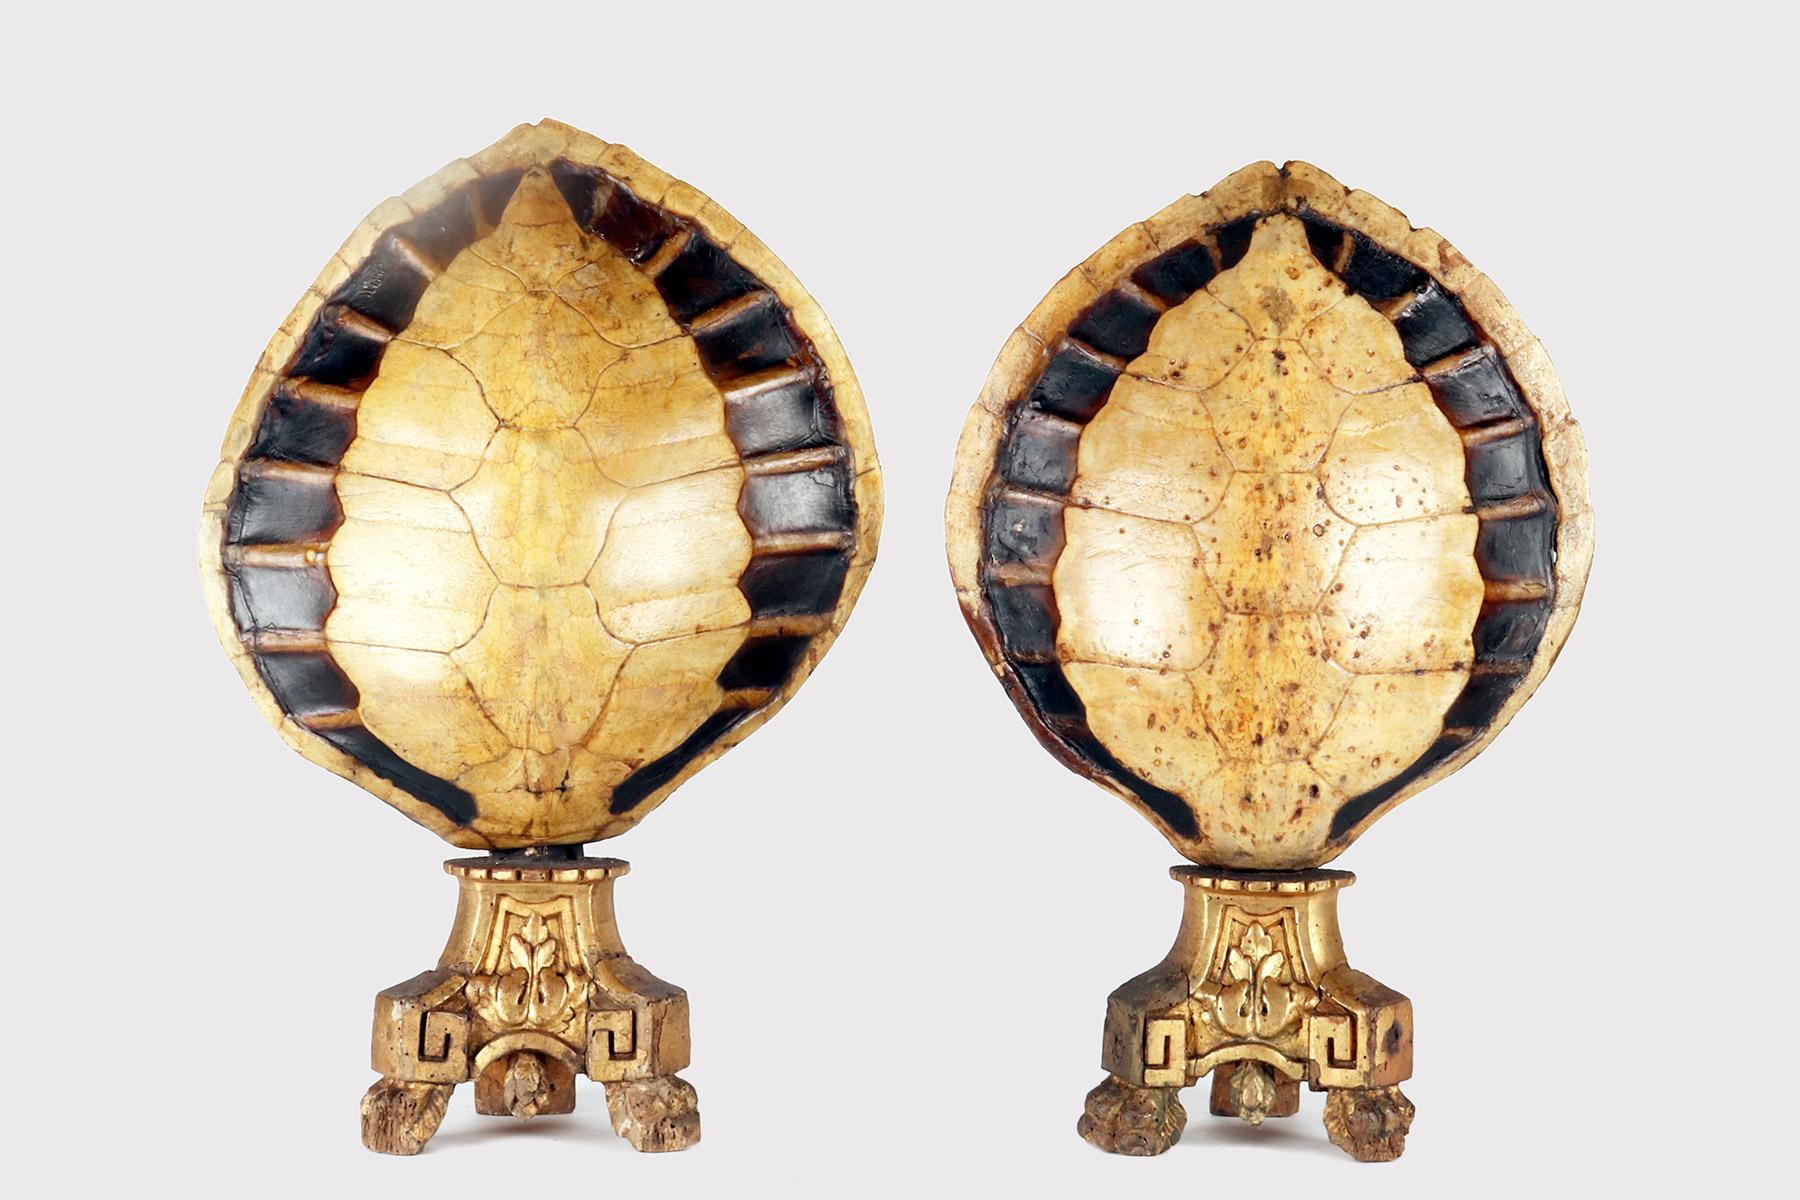 A wunderkammer marine specimen: an ancient pair of shells or carapaces of a hawksbill sea turtle (Eretmochelys Imbricata Linnaeus, 1766), the structure in bone and cartilage, originally covered by scales. The specimen is mounted on carved and gilded